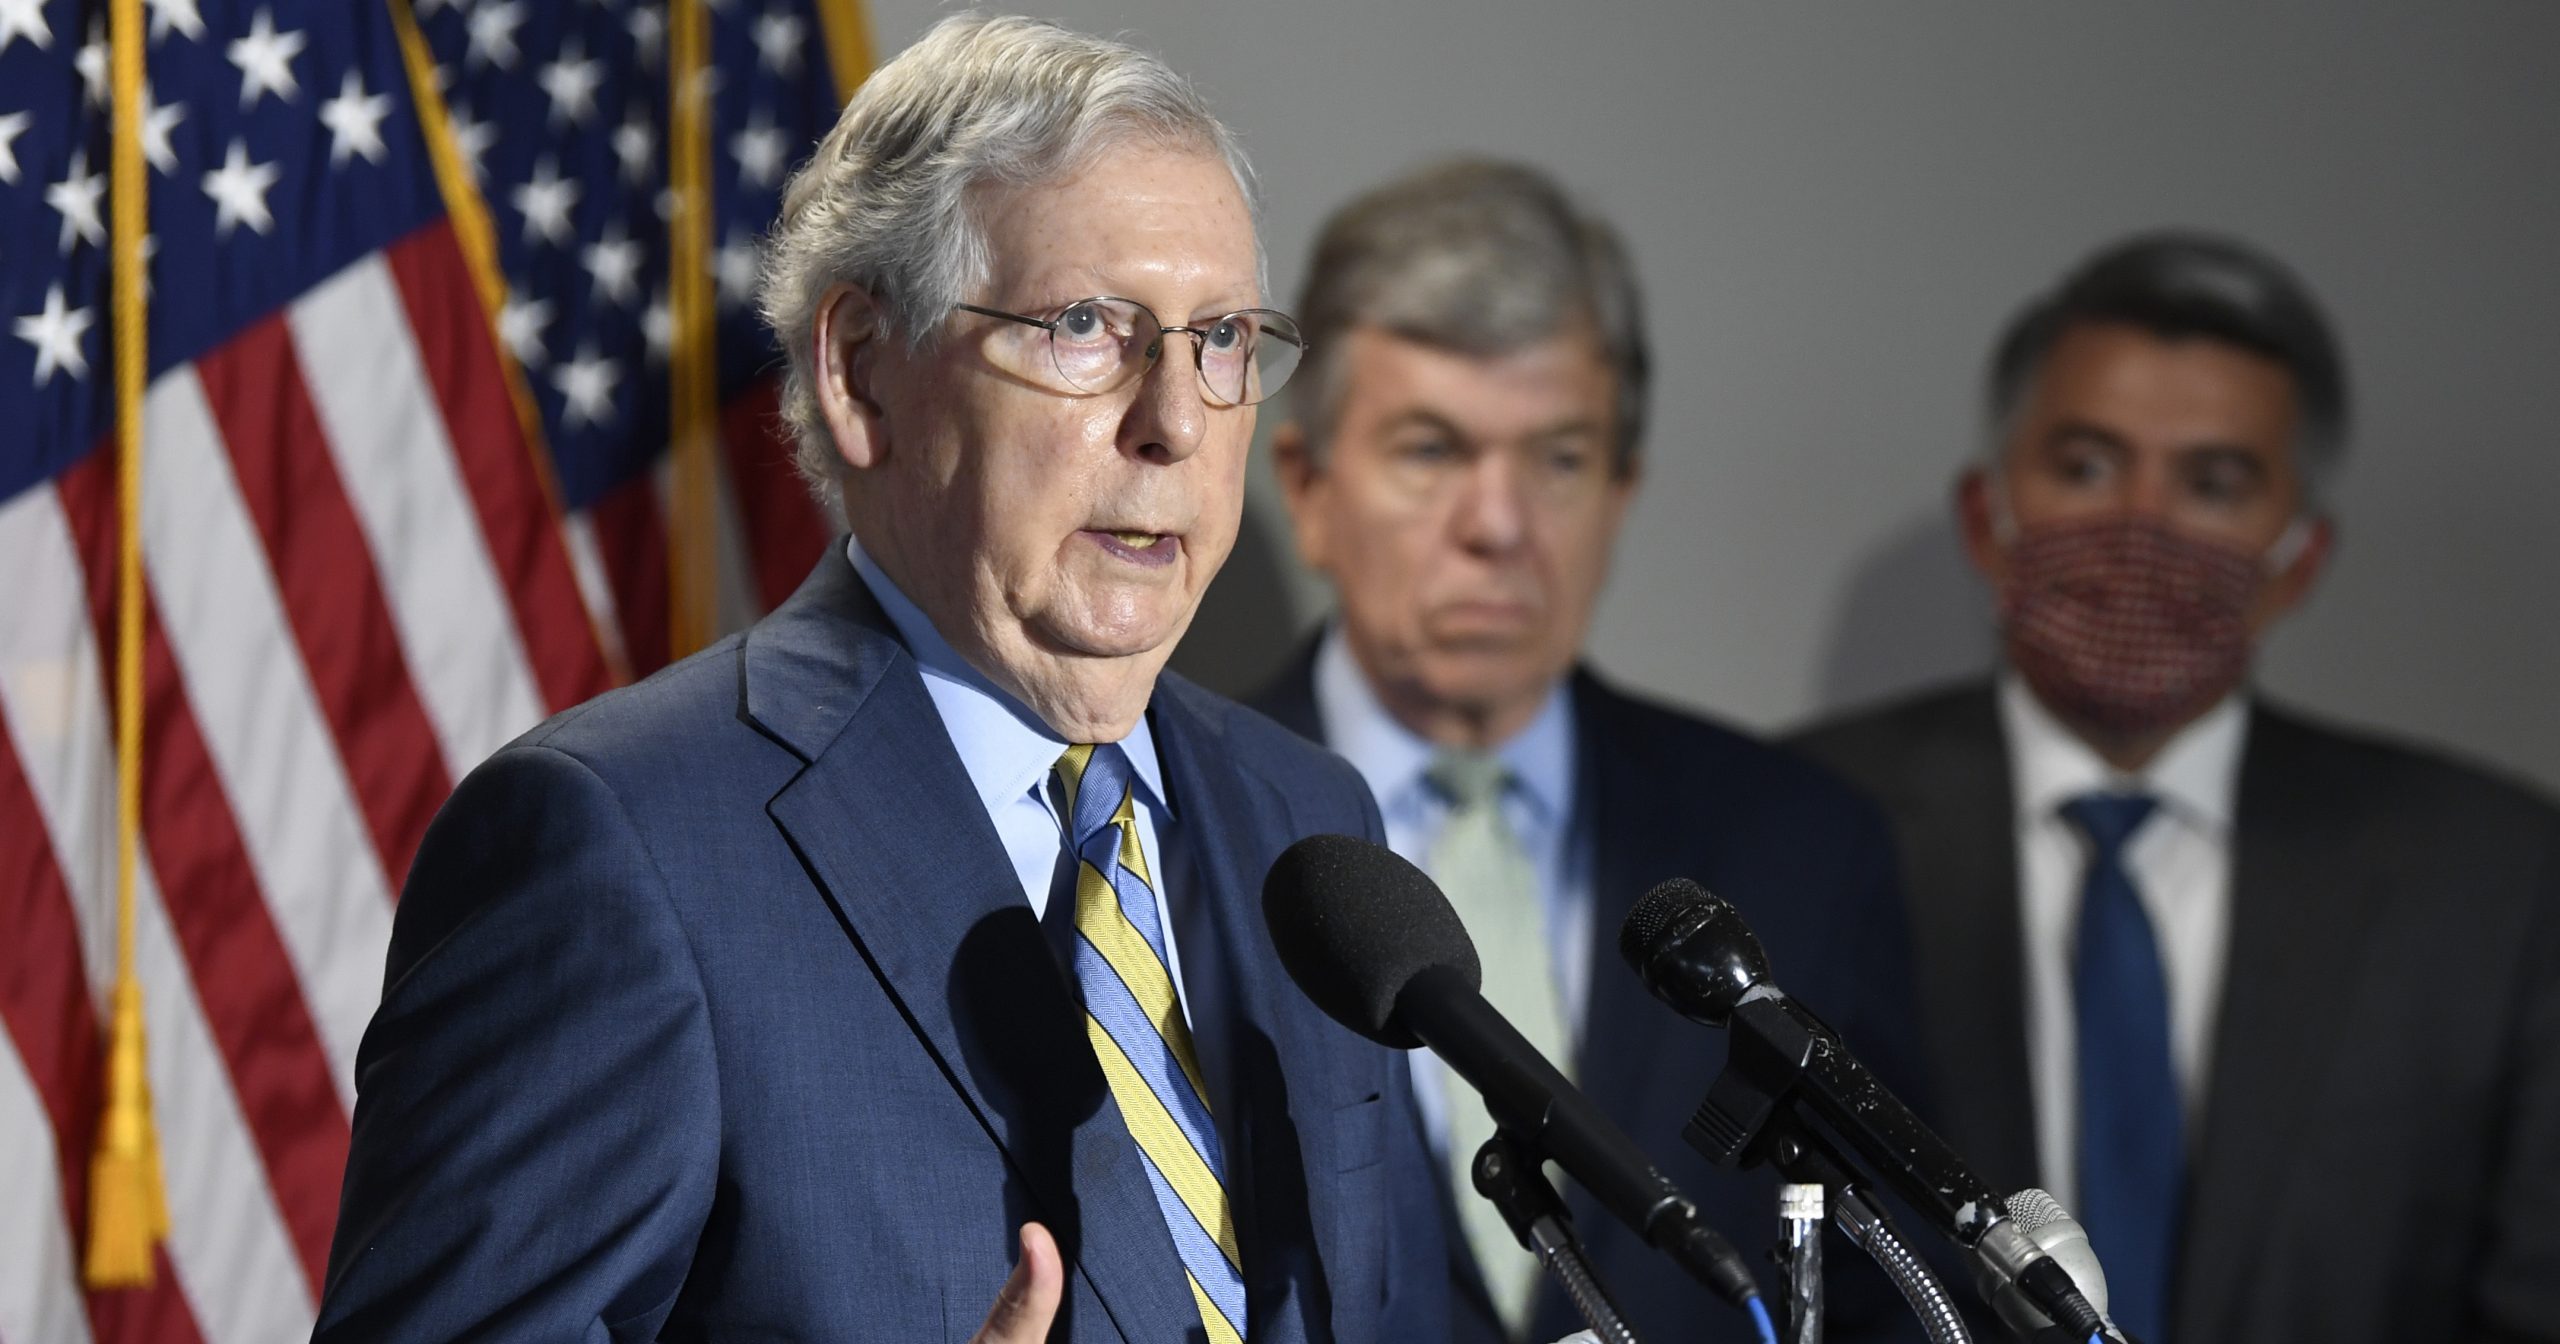 Senate Majority Leader Mitch McConnell of Kentucky, left, speaks to reporters following the weekly Republican policy luncheon on Capitol Hill in Washington, D.C., on June 9, 2020.